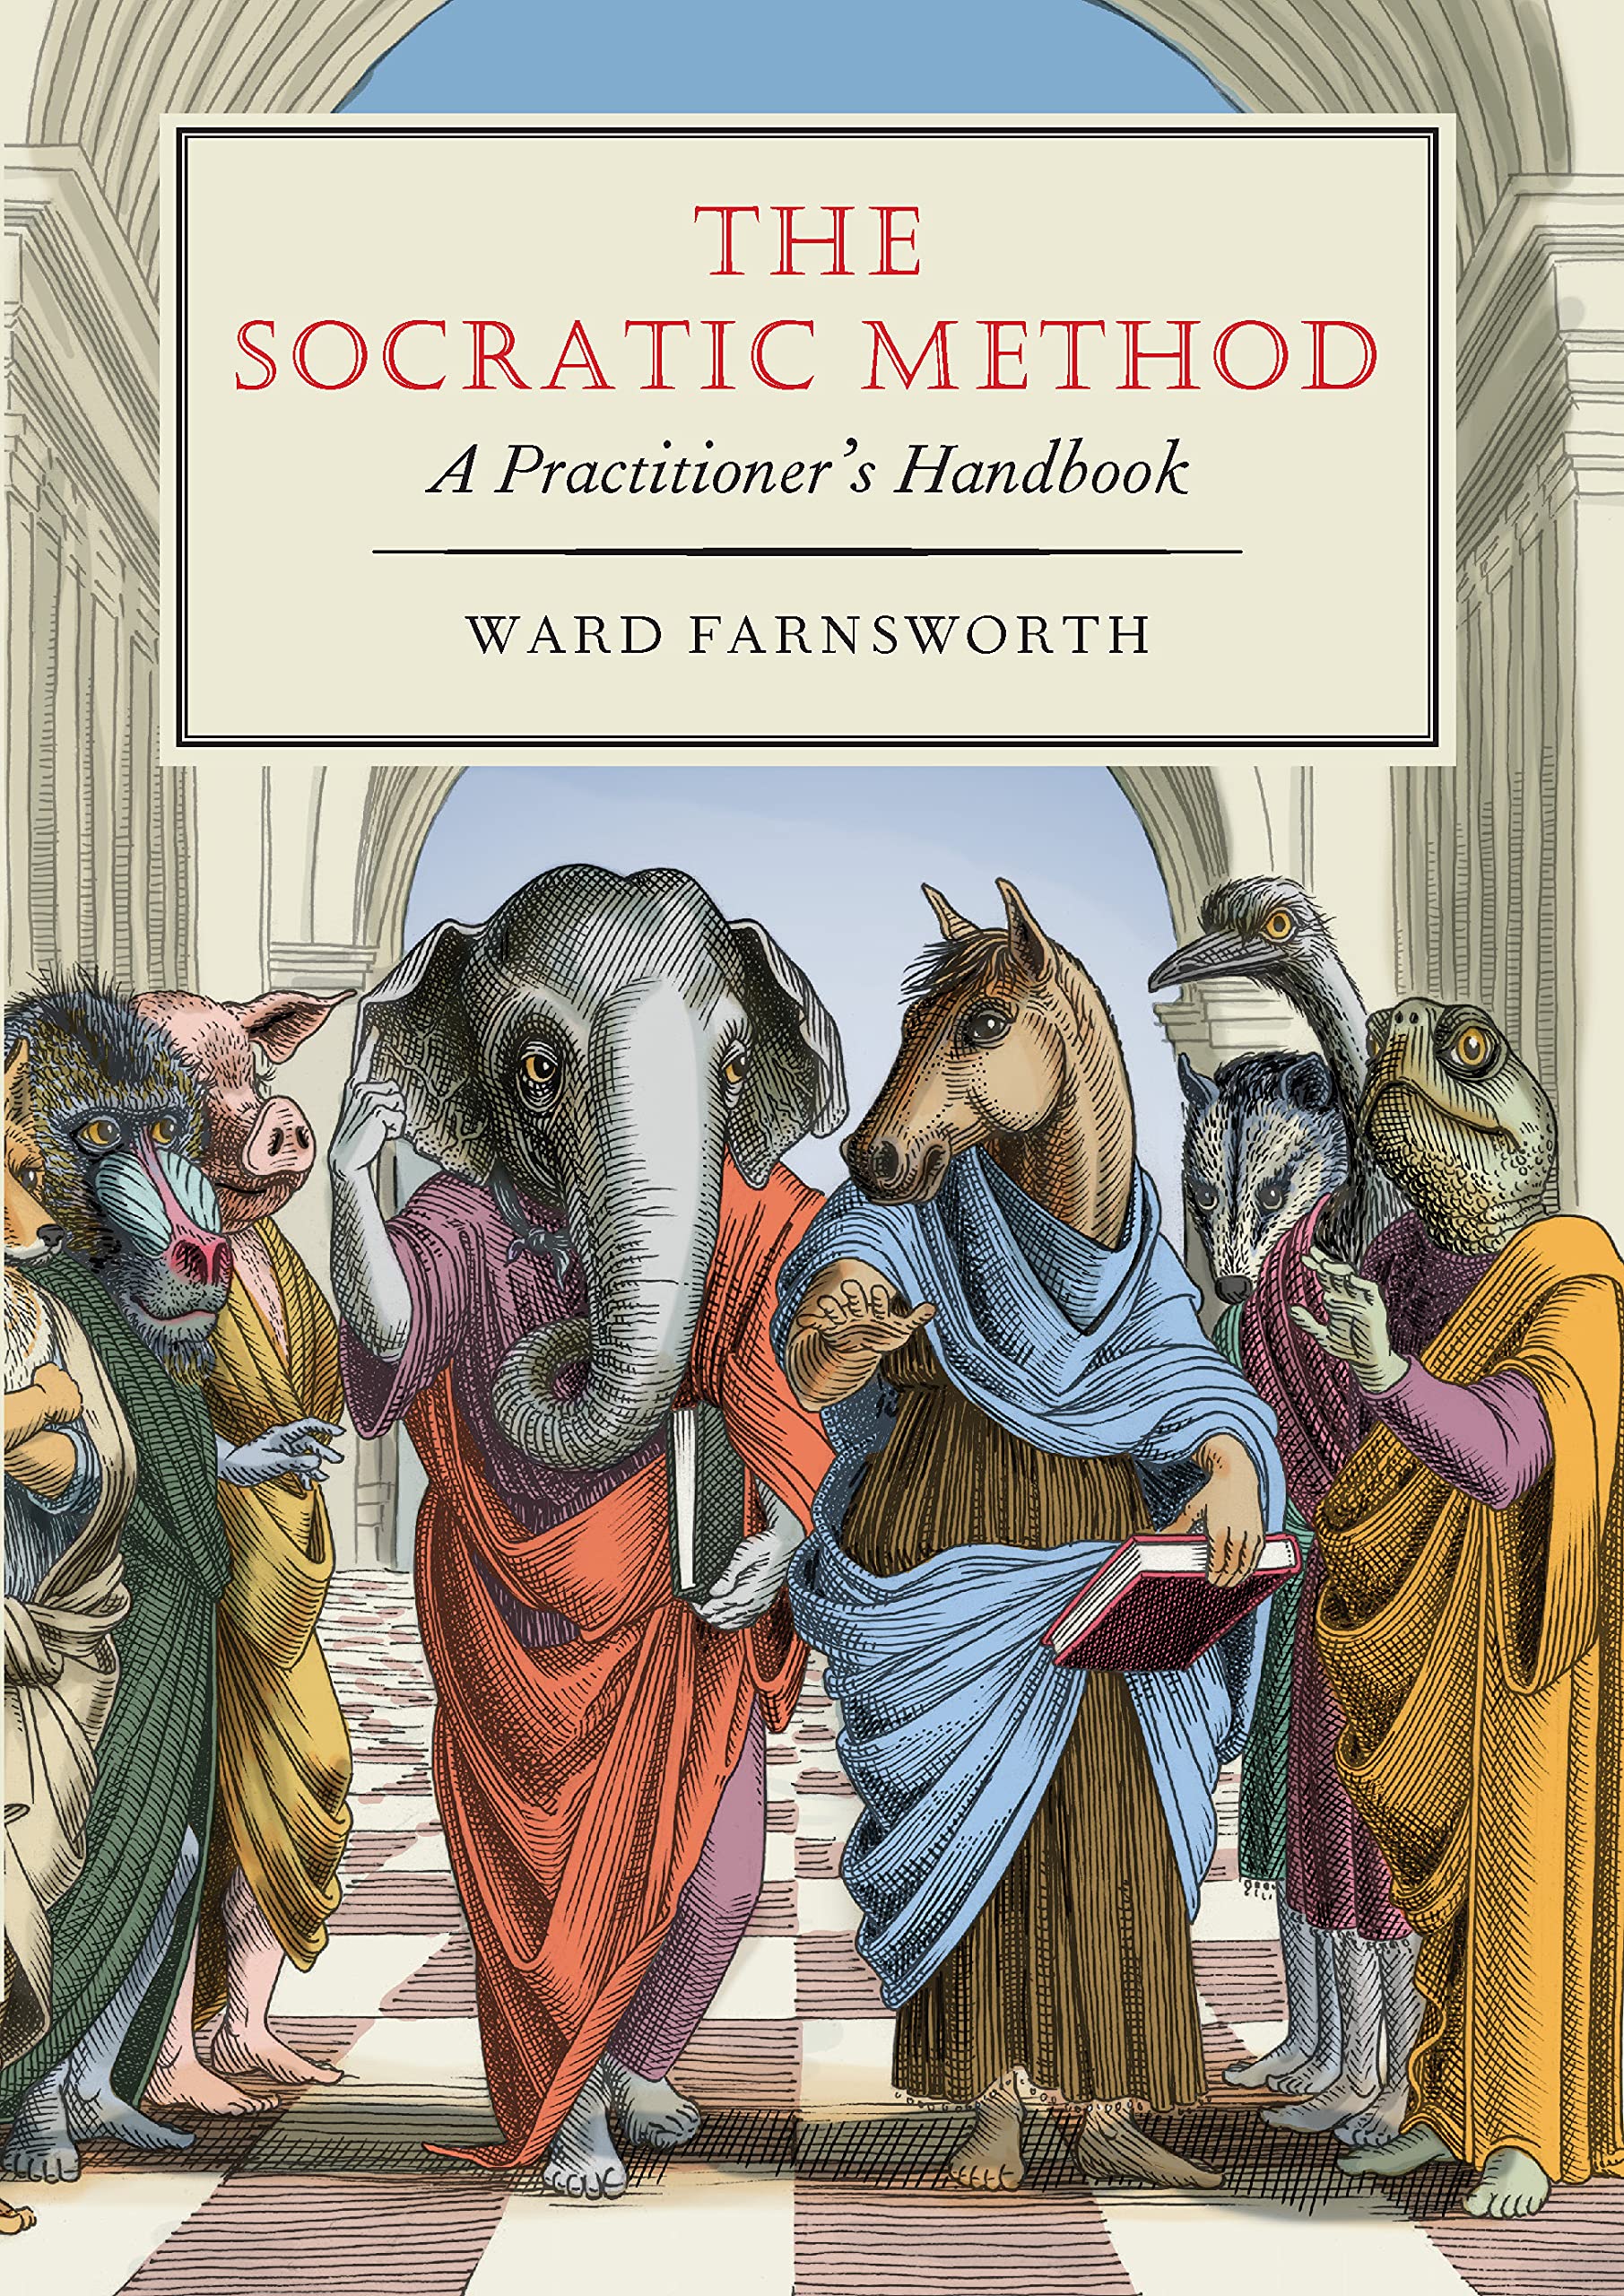 Review: “The Socratic Method” – By Farnsworth